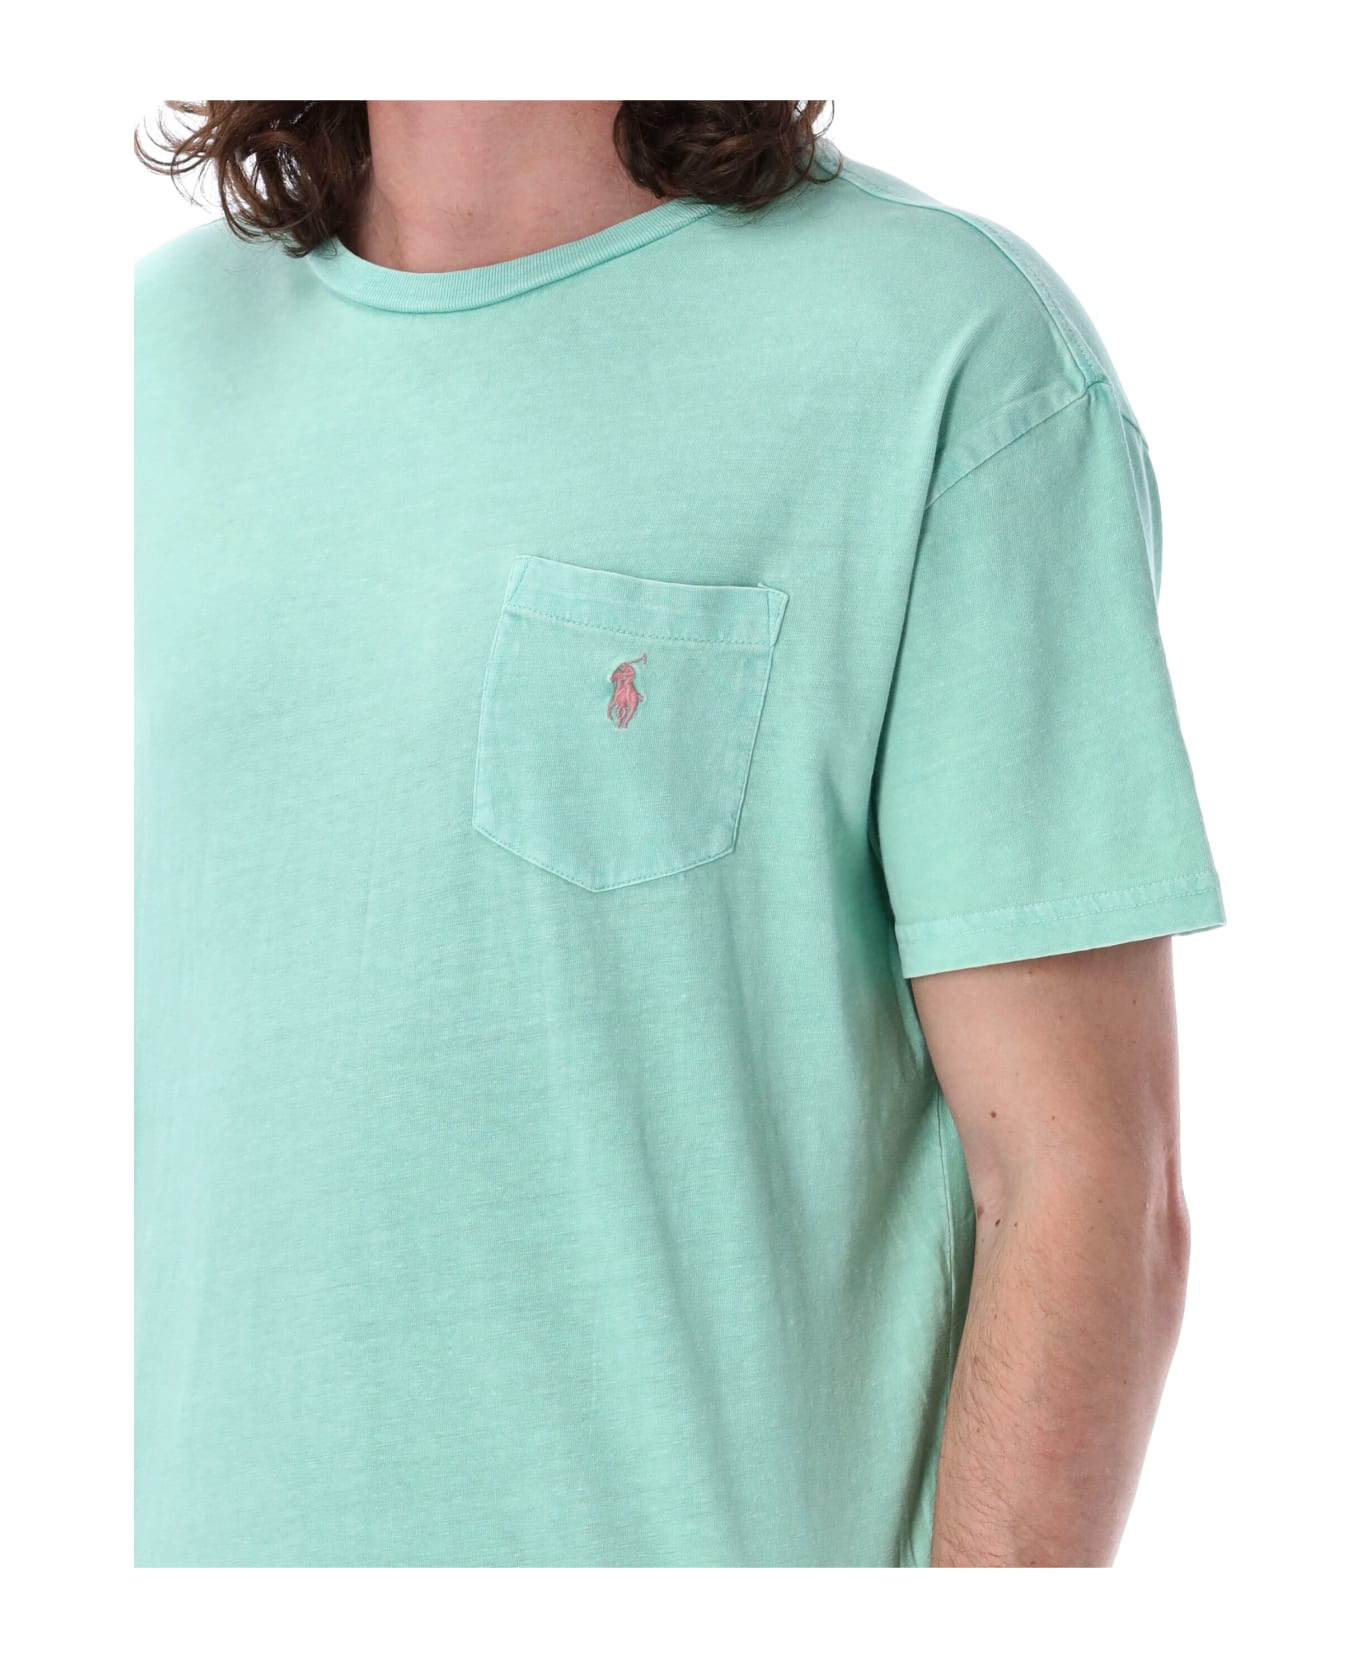 Polo Ralph Lauren Washed Pocket Tee - MINT